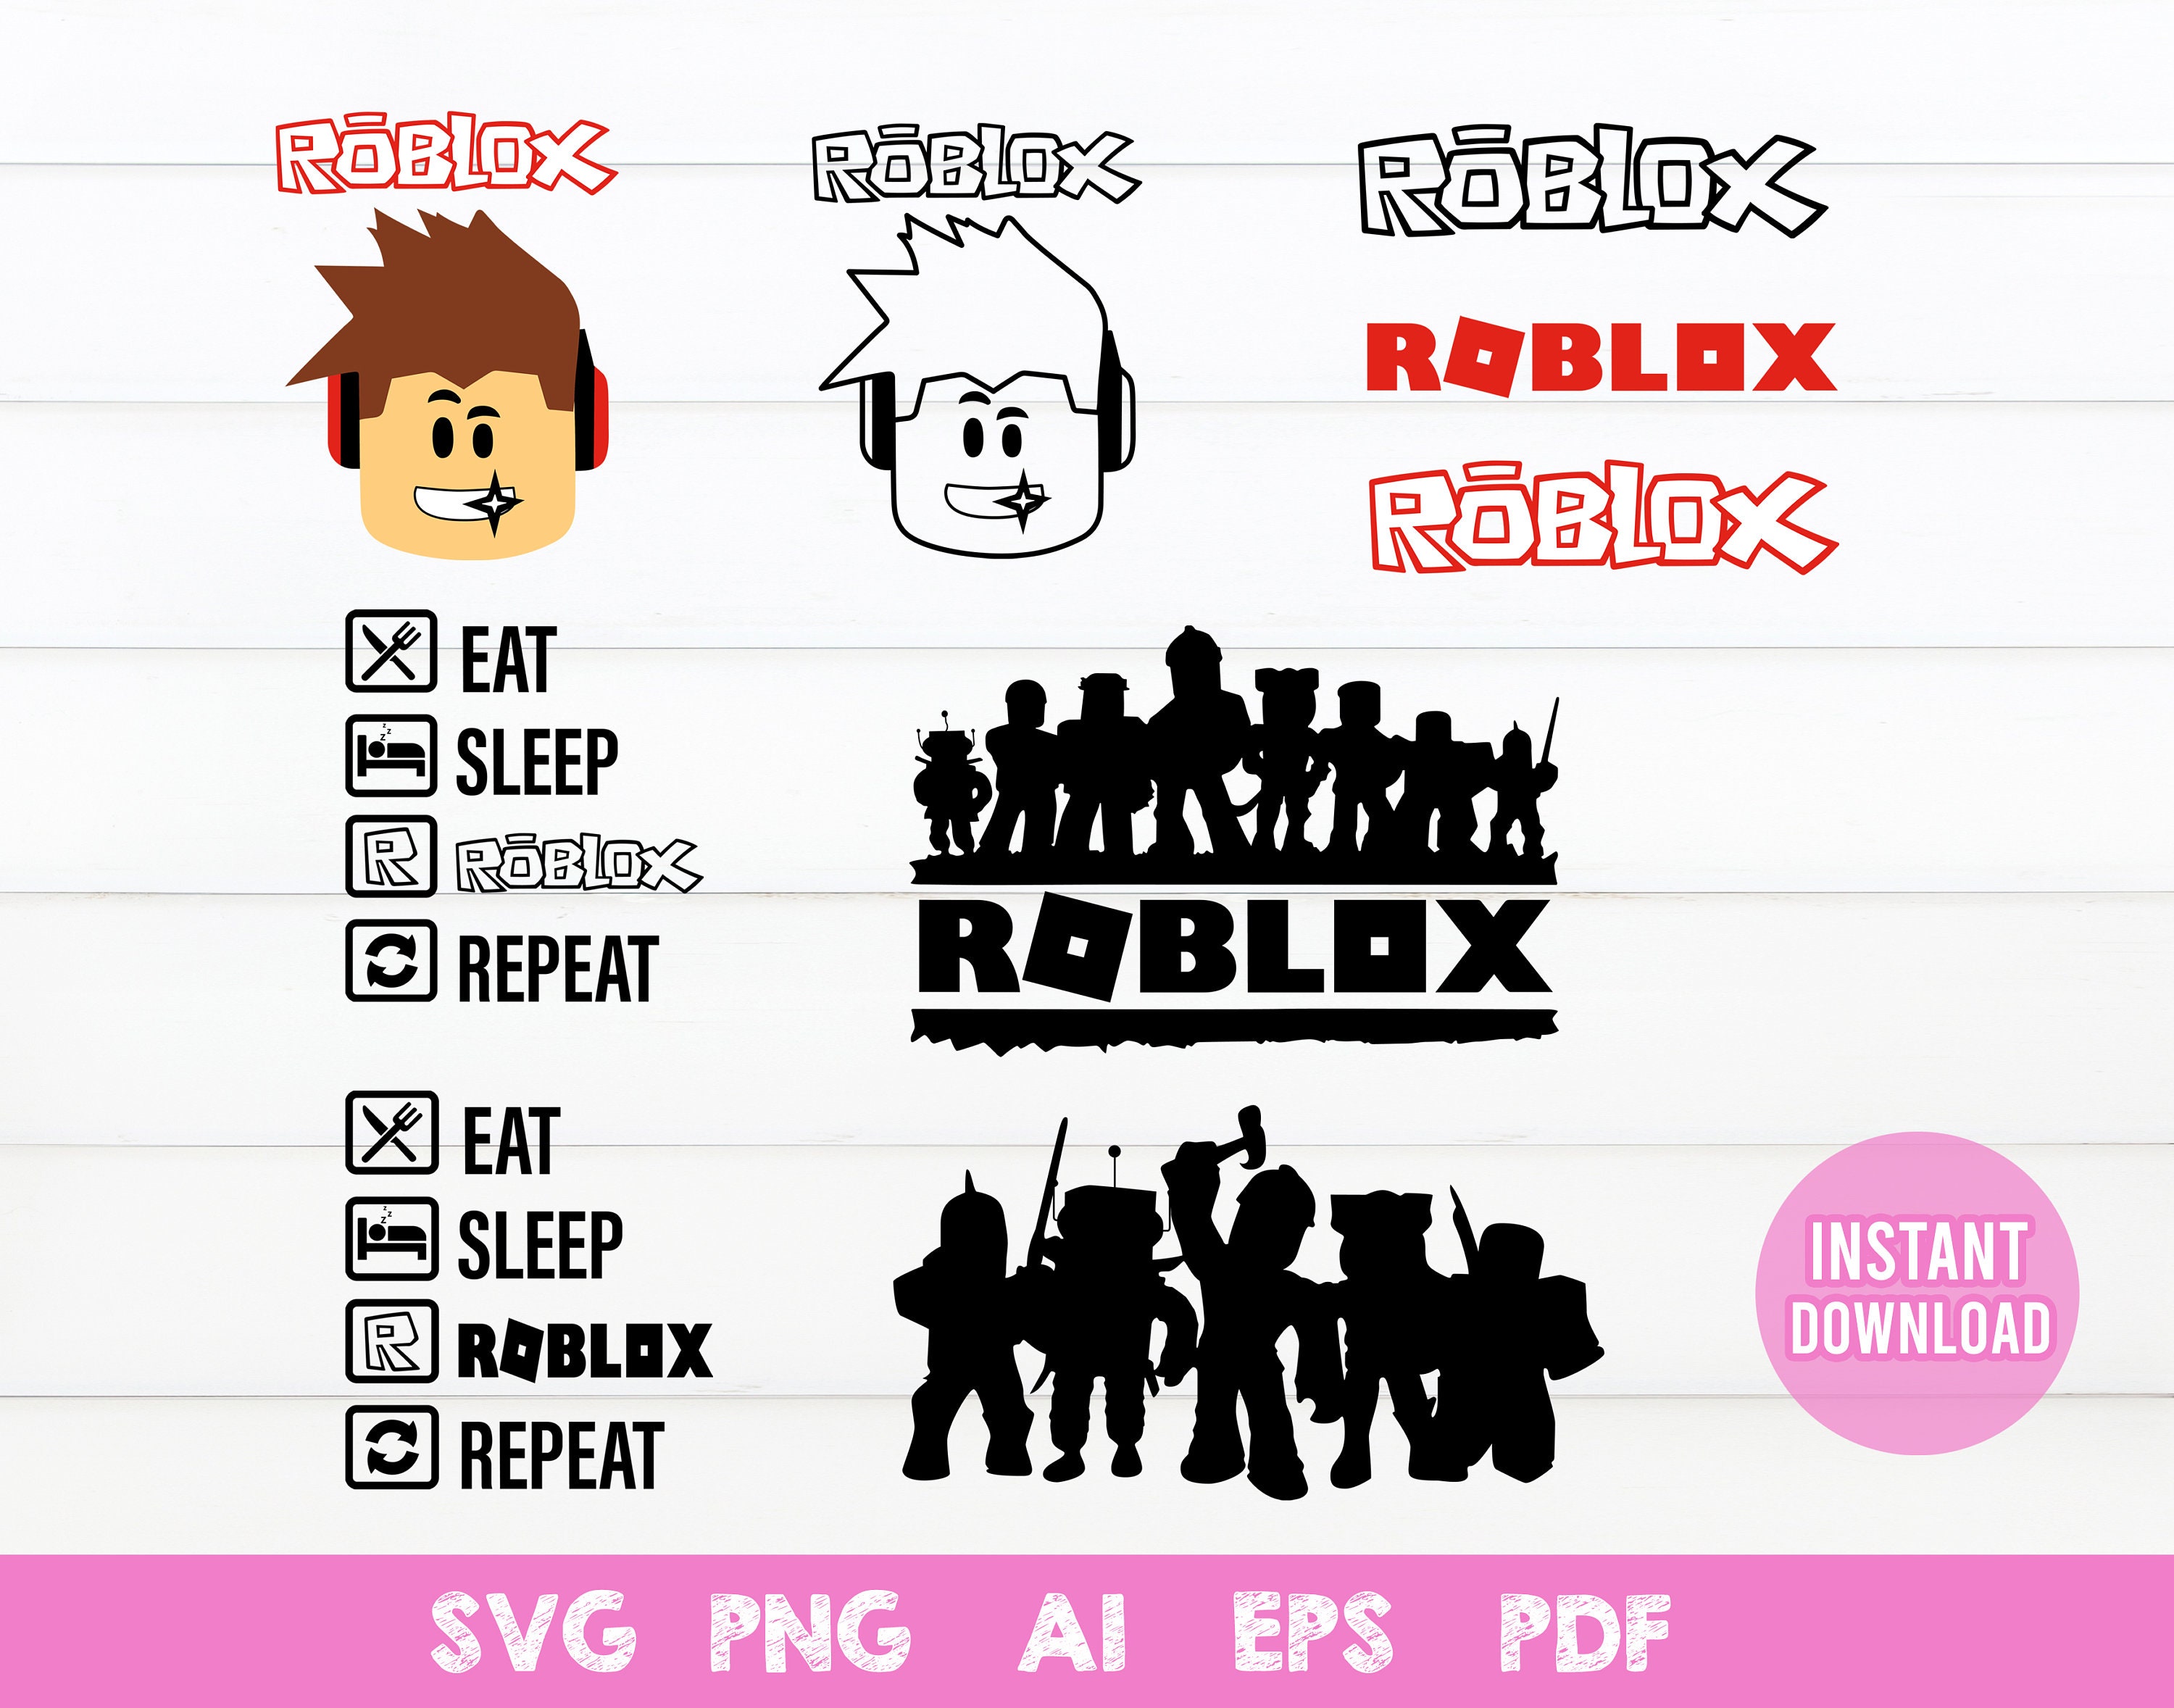 Roblox Bundle Svg Roblox Svg Roblox Clipart Eps Aisvg Etsy - svg free roblox character svg